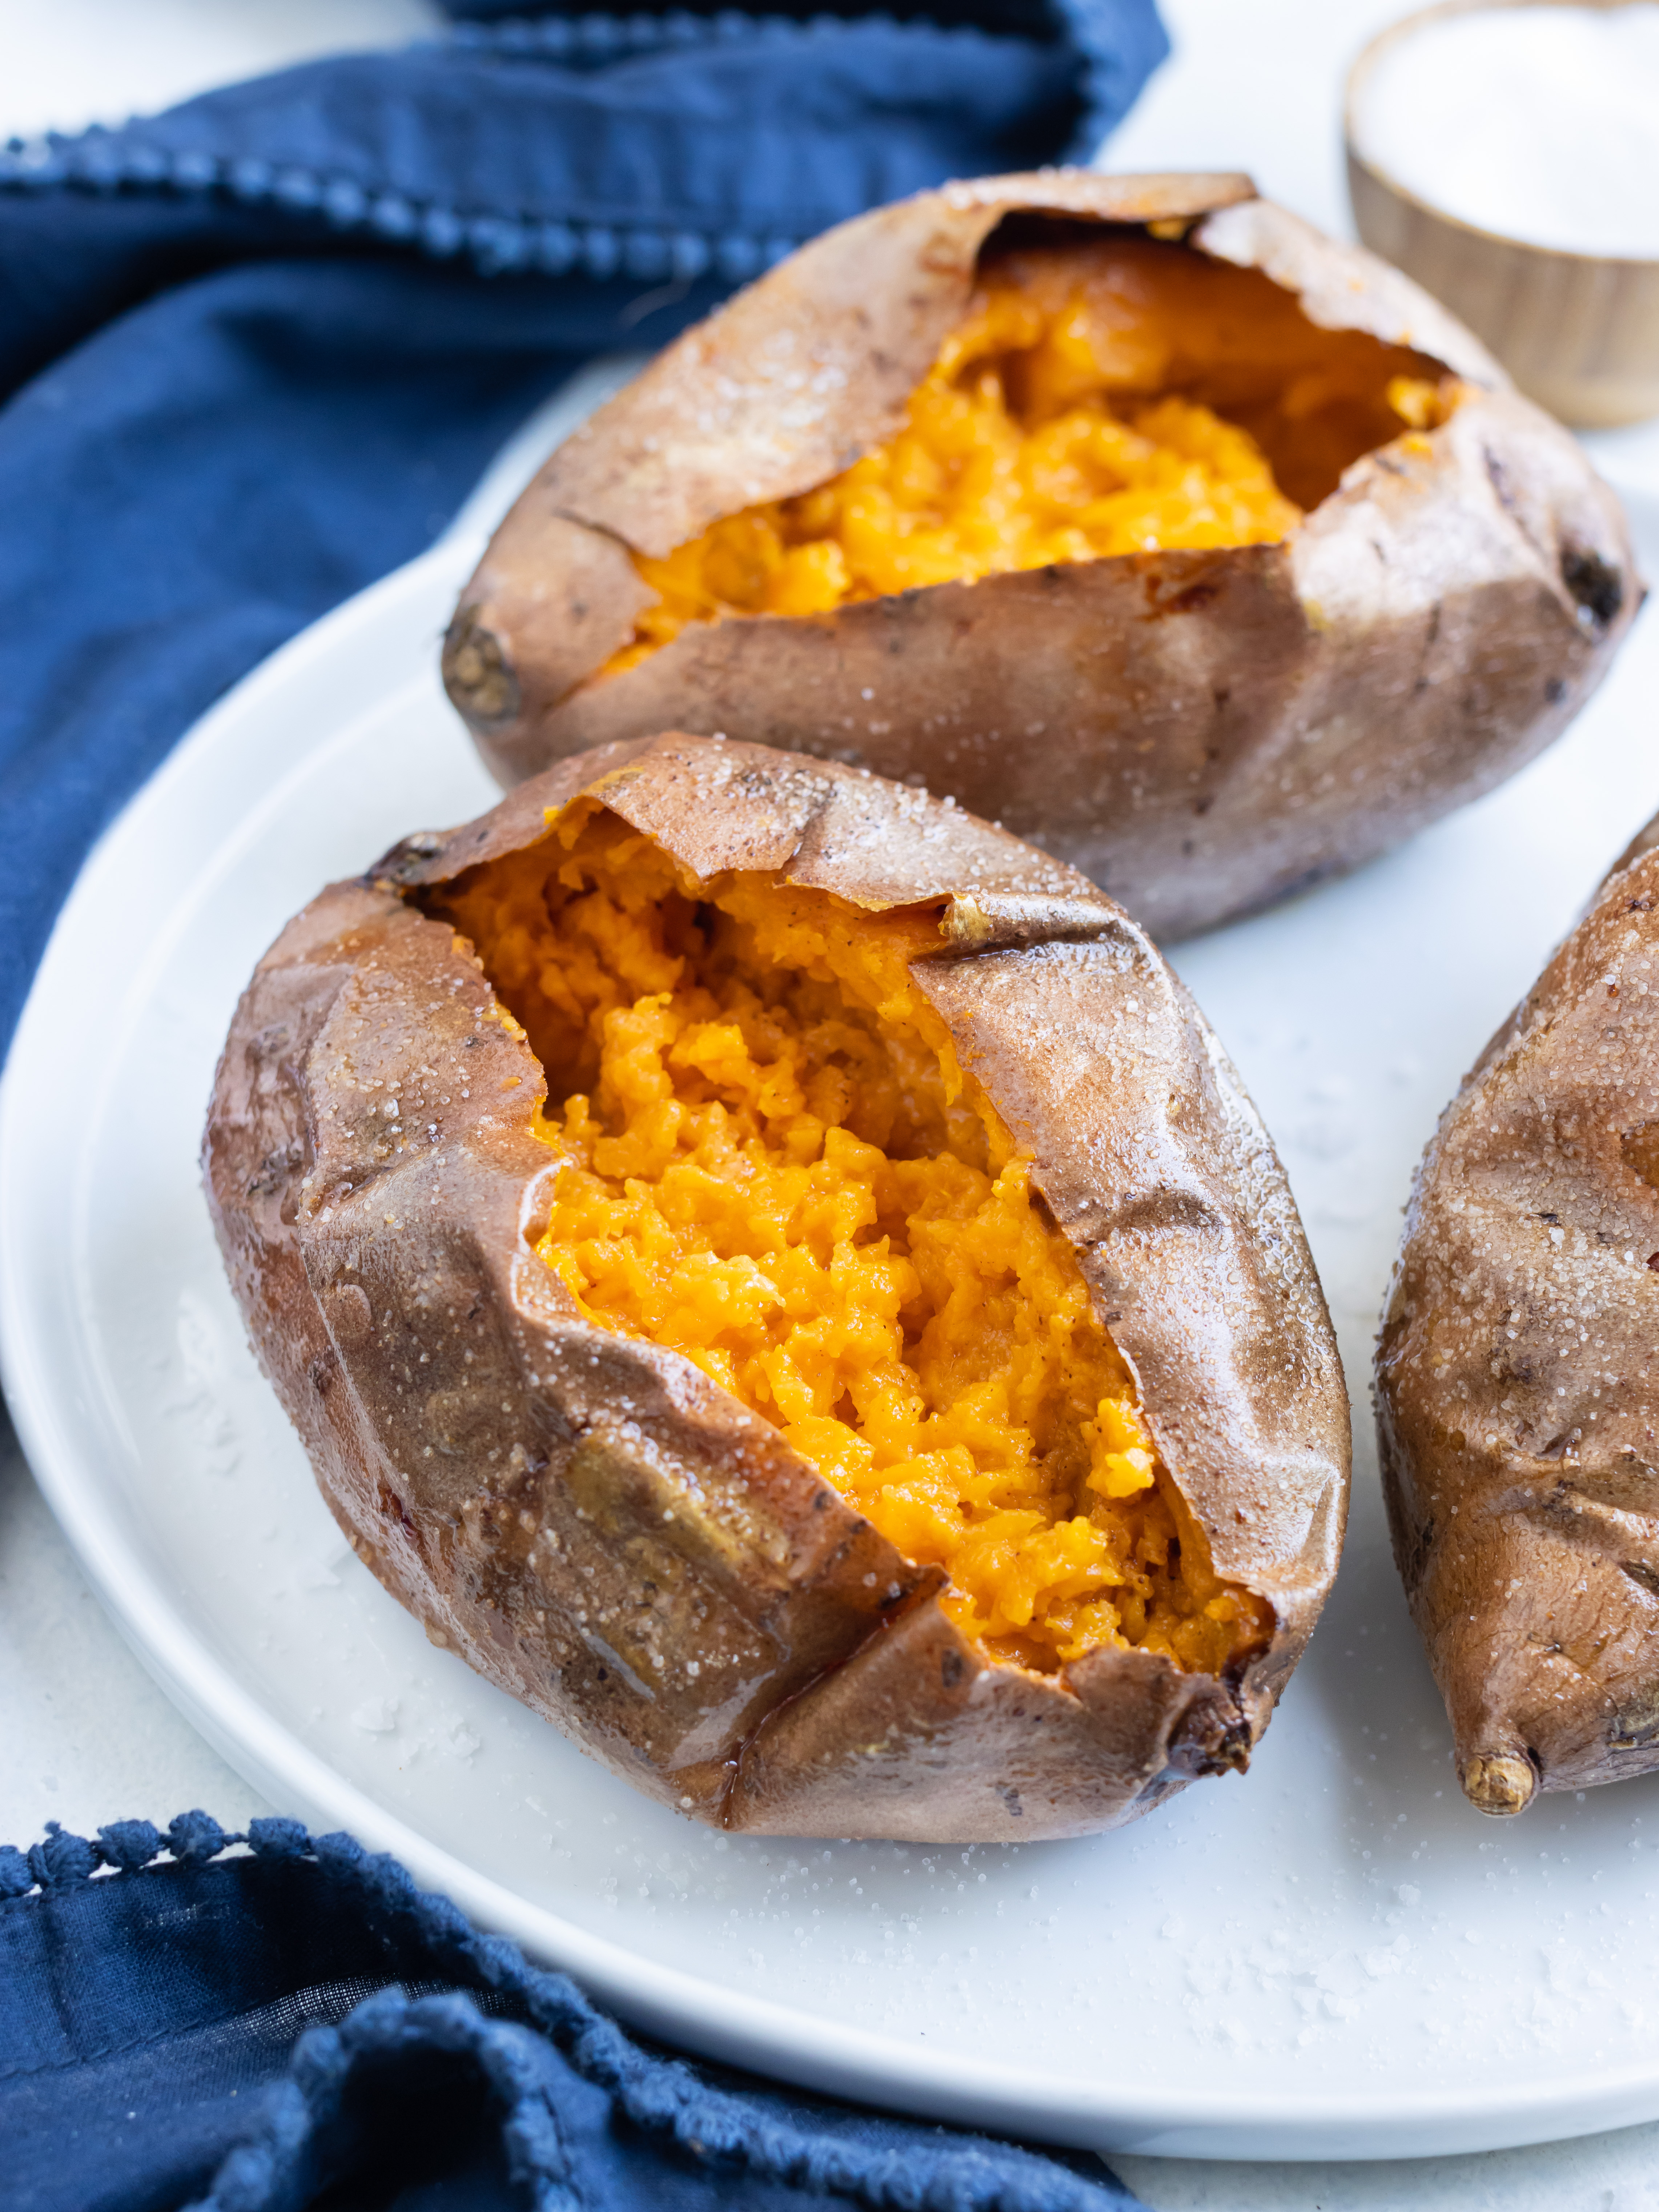 Air fried baked sweet potatoes are ready to be served as a side dish.